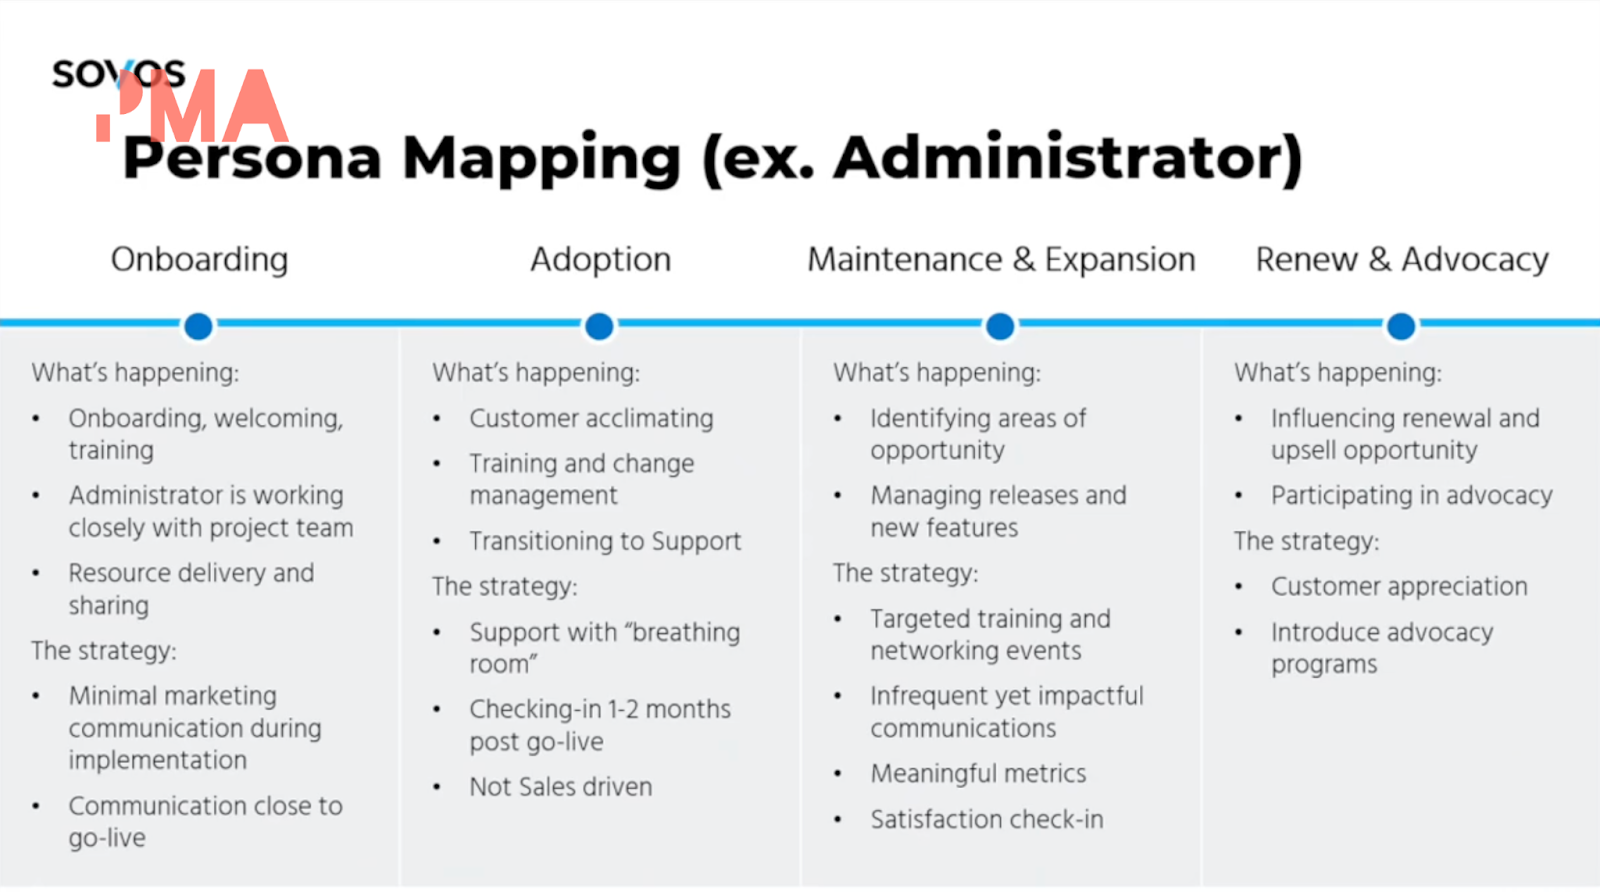 Alt: Persona mapping example for an administrator. Has four stages: onboarding, adoption, maintenance and expansion, renew and advocacy.